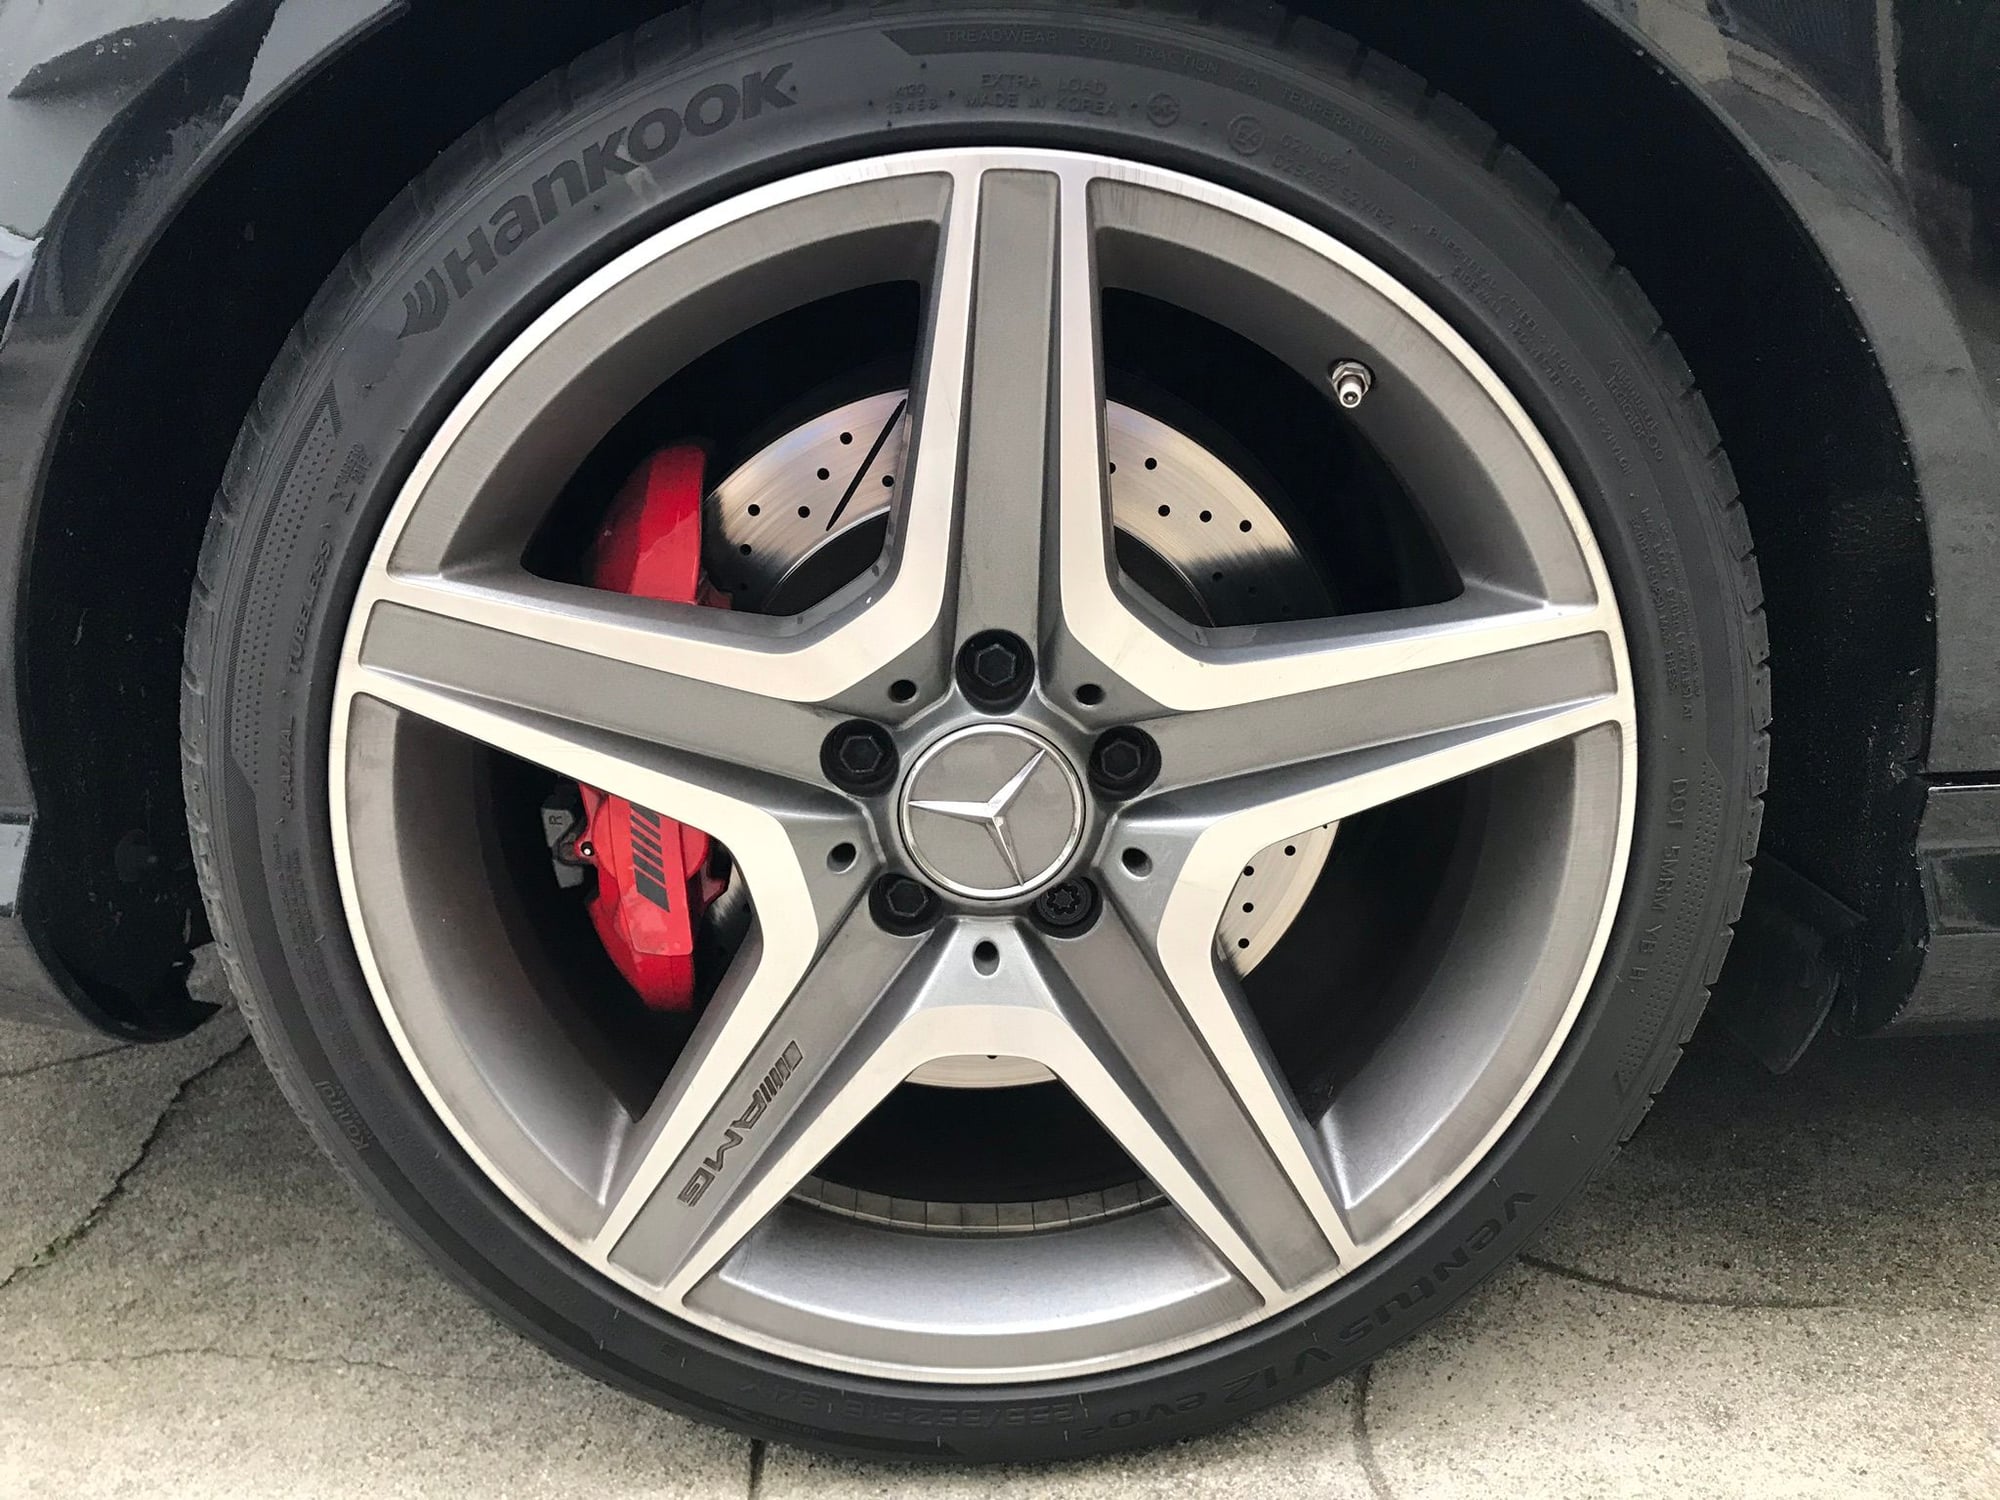 Wheels and Tires/Axles - C63 w204 OEM AMG double spoke wheel and tire set - Used - 2009 to 2014 Mercedes-Benz C63 AMG - San Francisco, CA 94116, United States